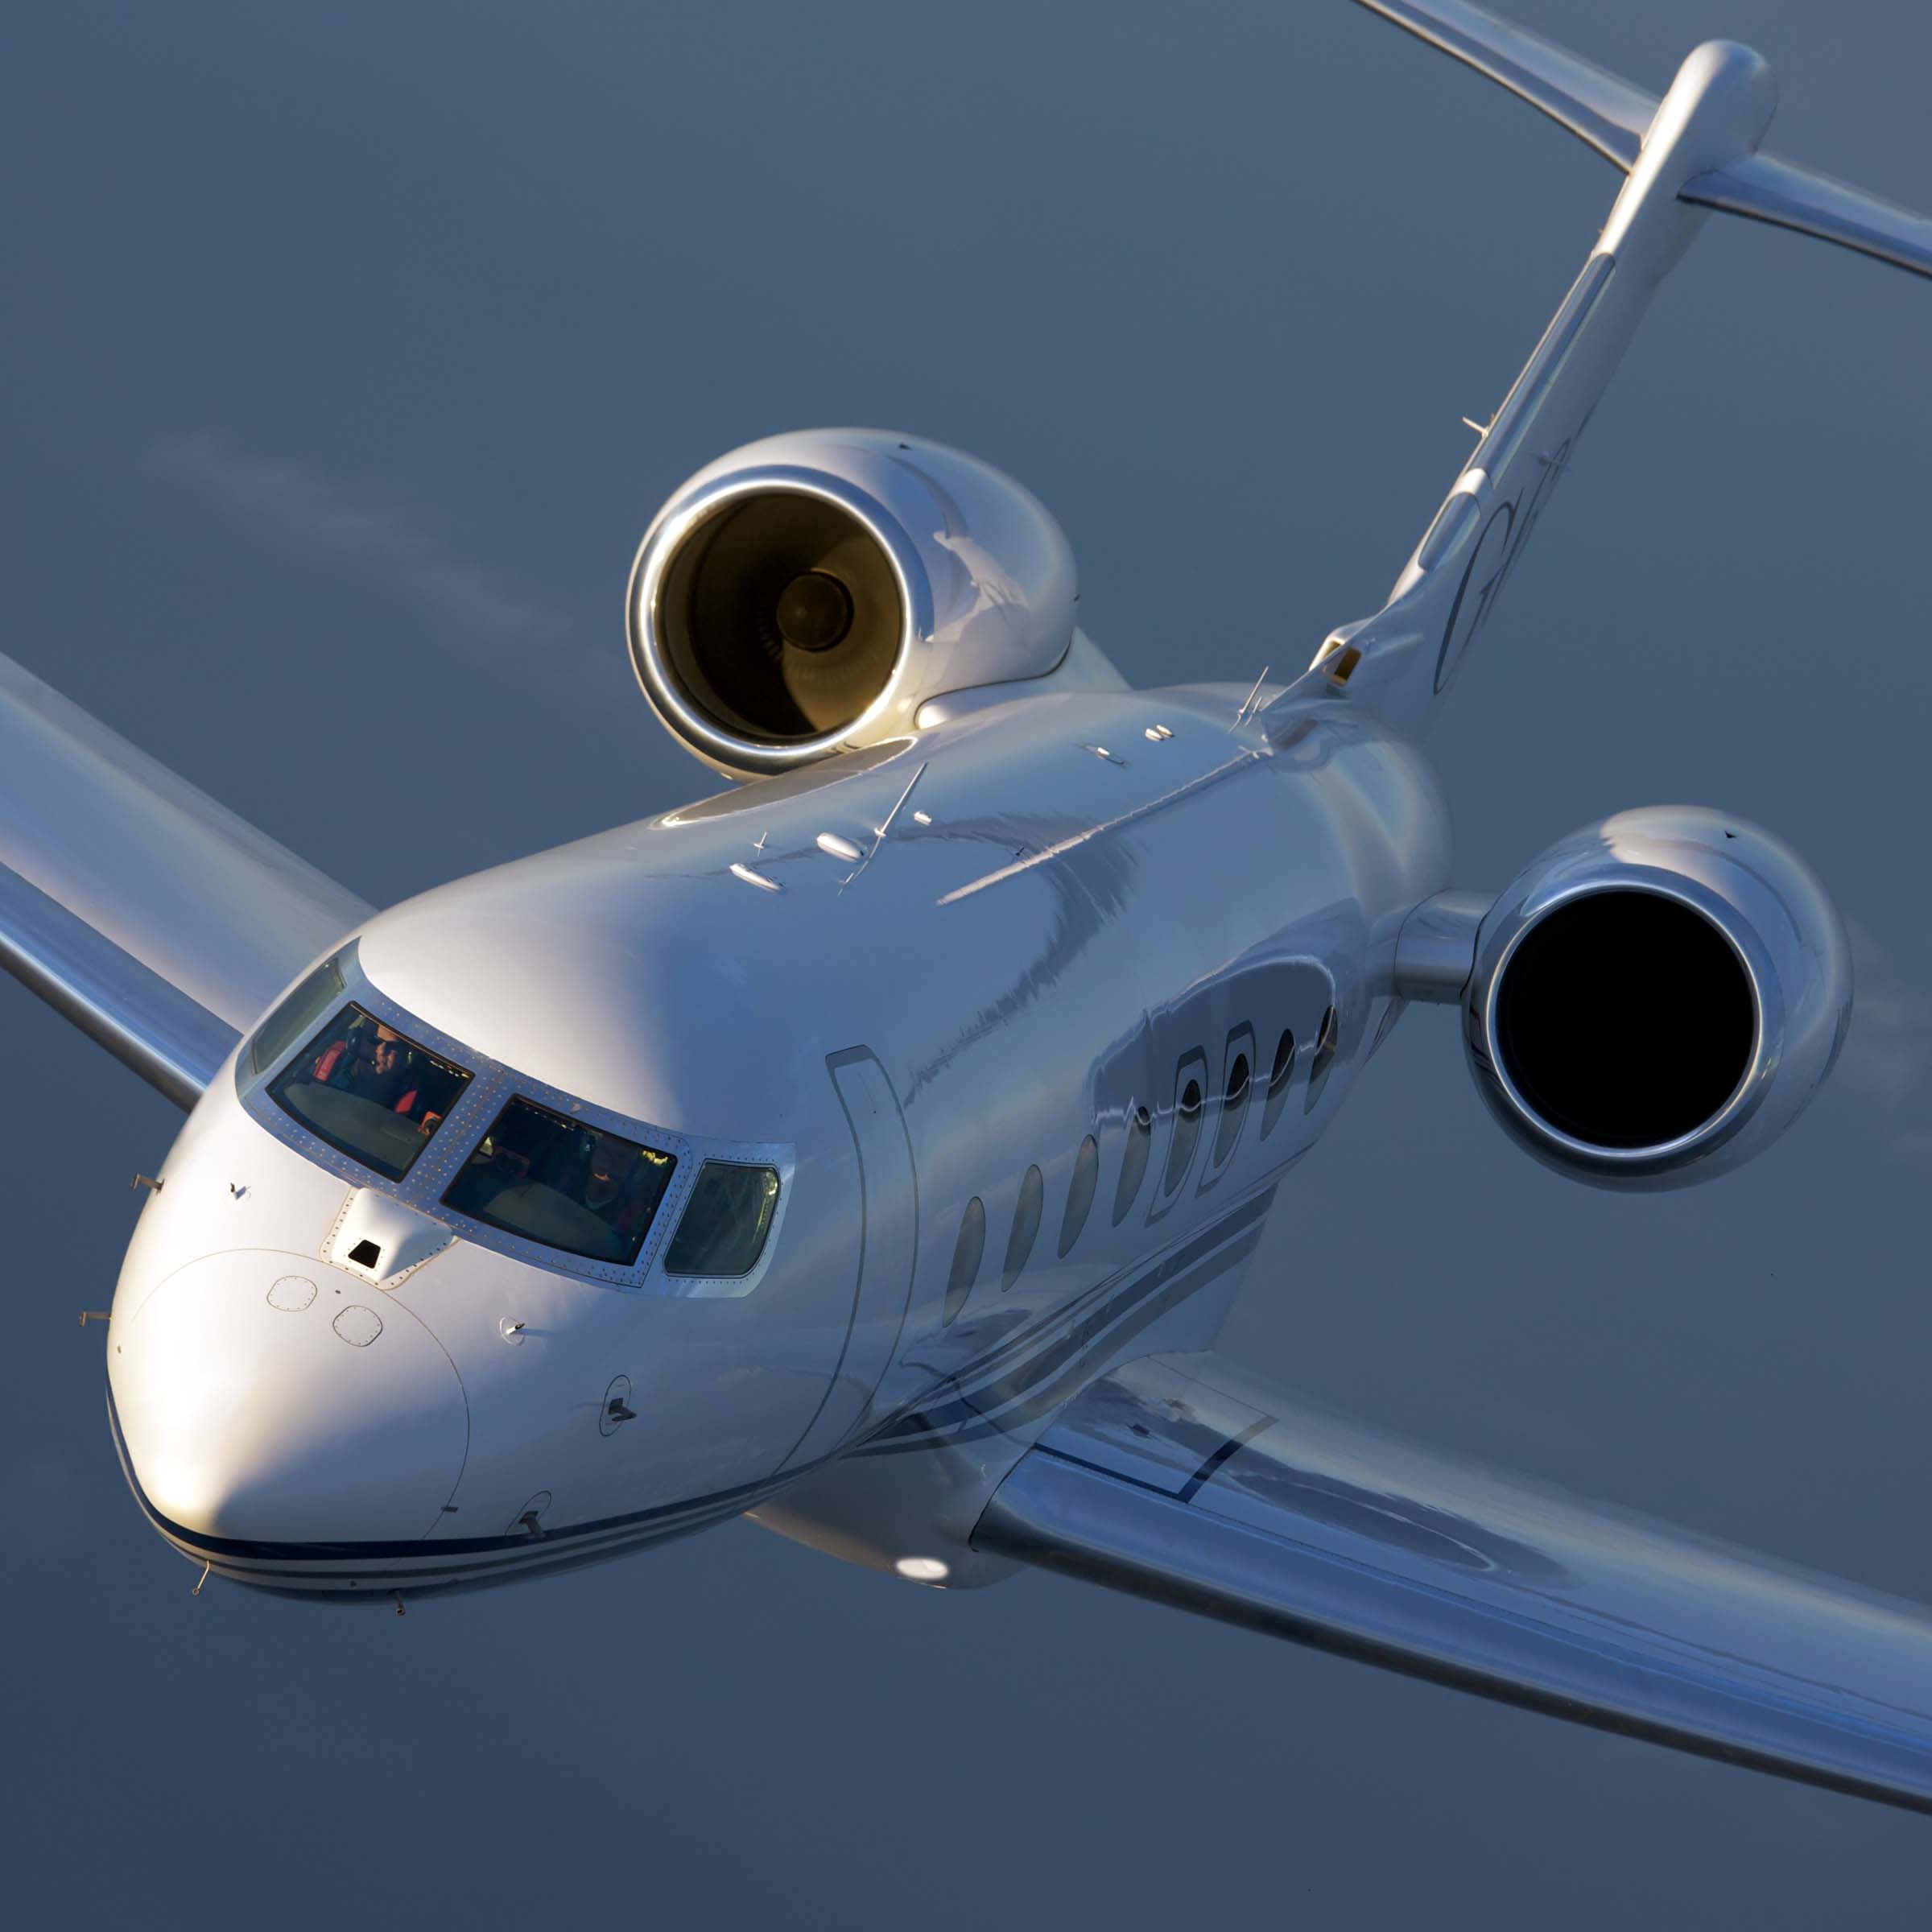 A business jet with unique airplane depreciation rules